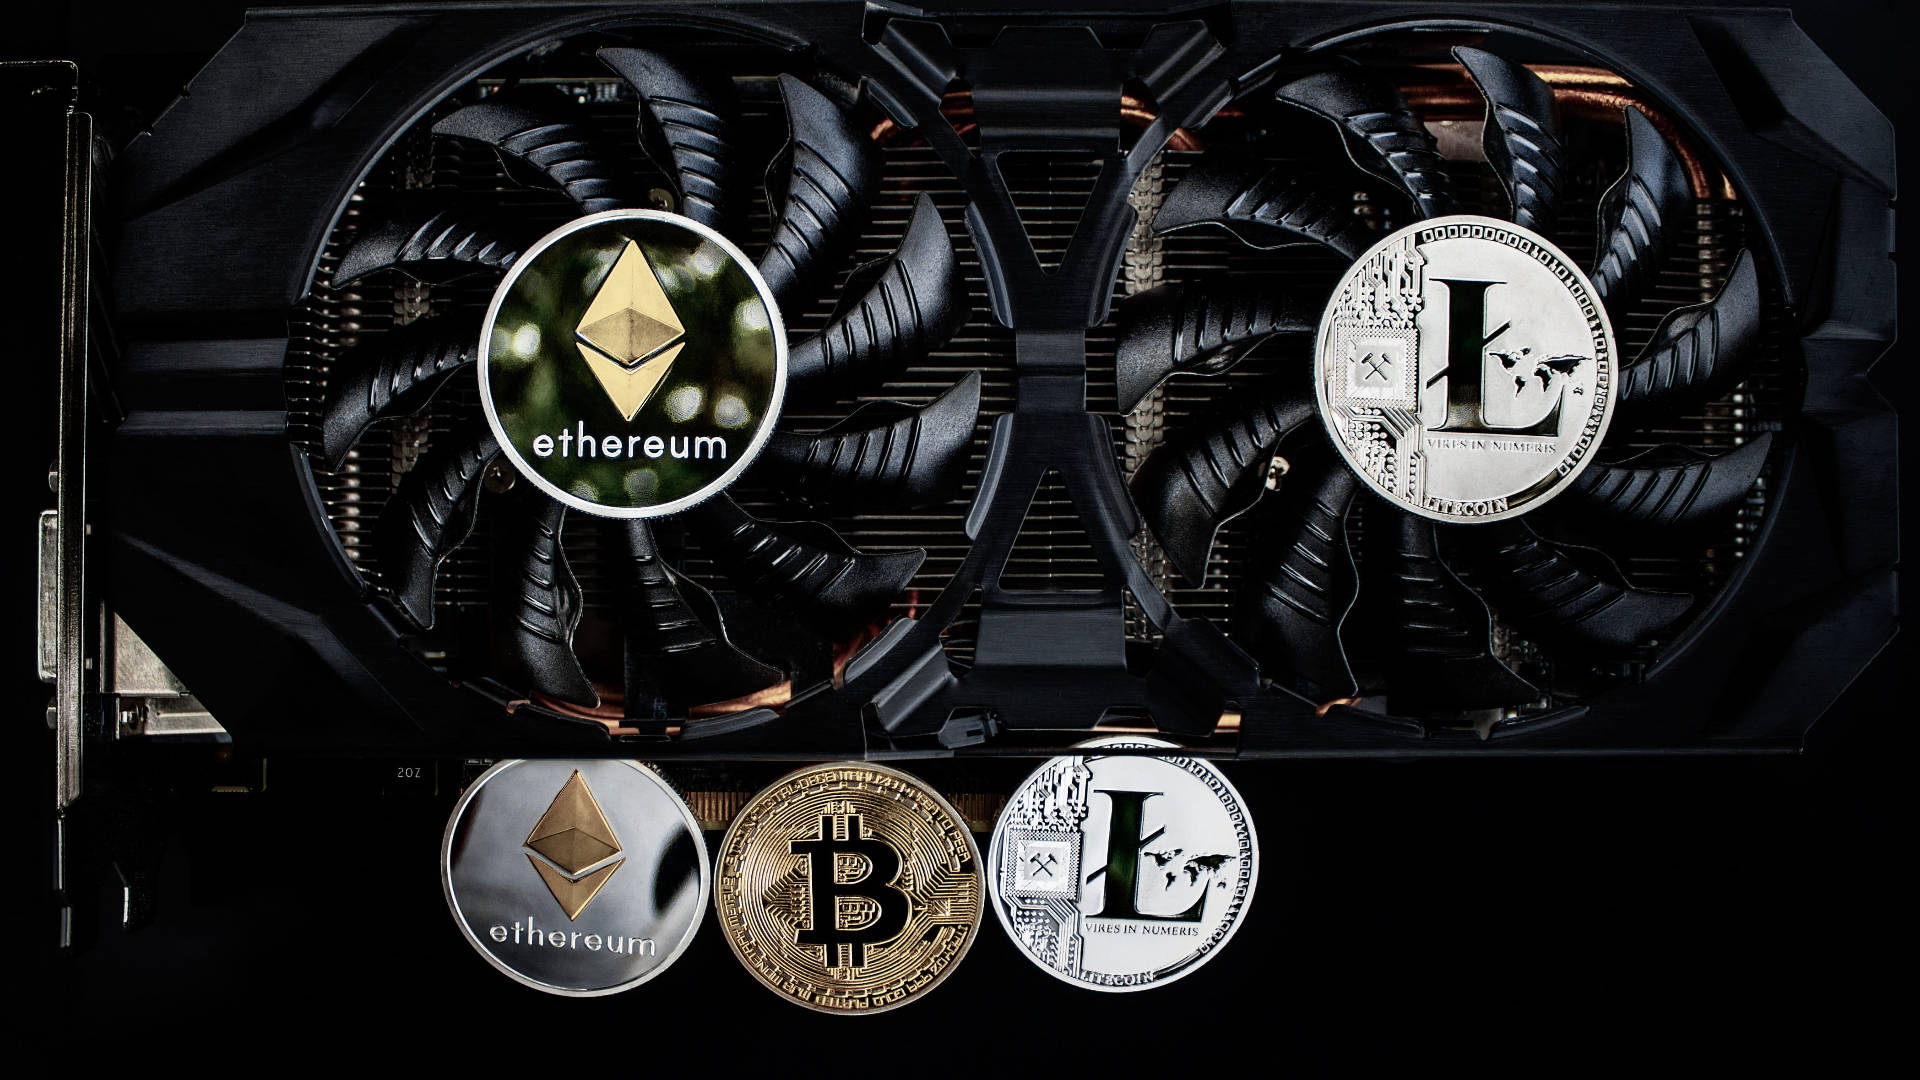 Ethereum Coins On Computer Fans